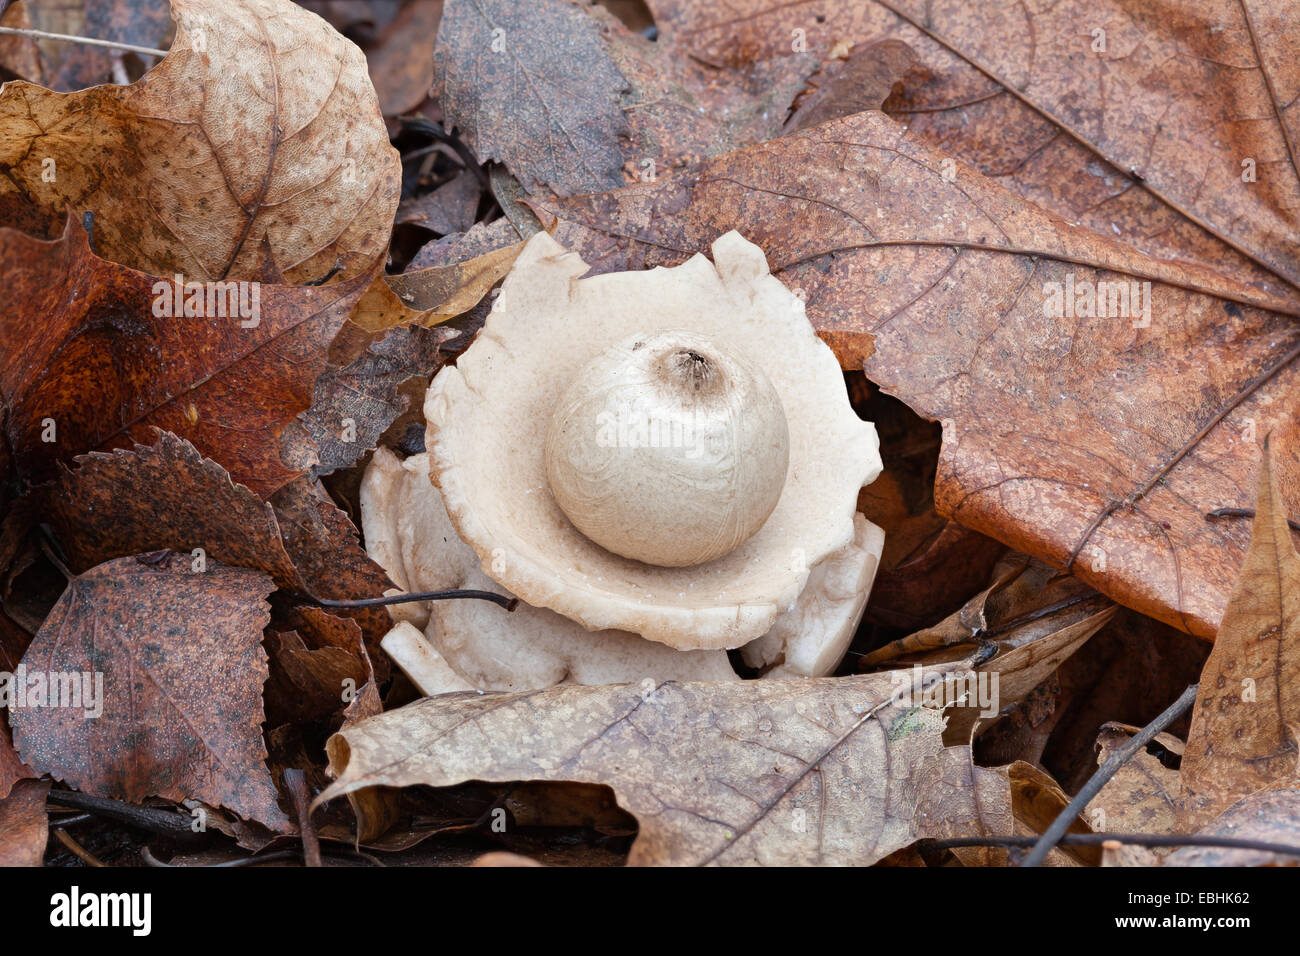 Earthstar a collare Foto Stock